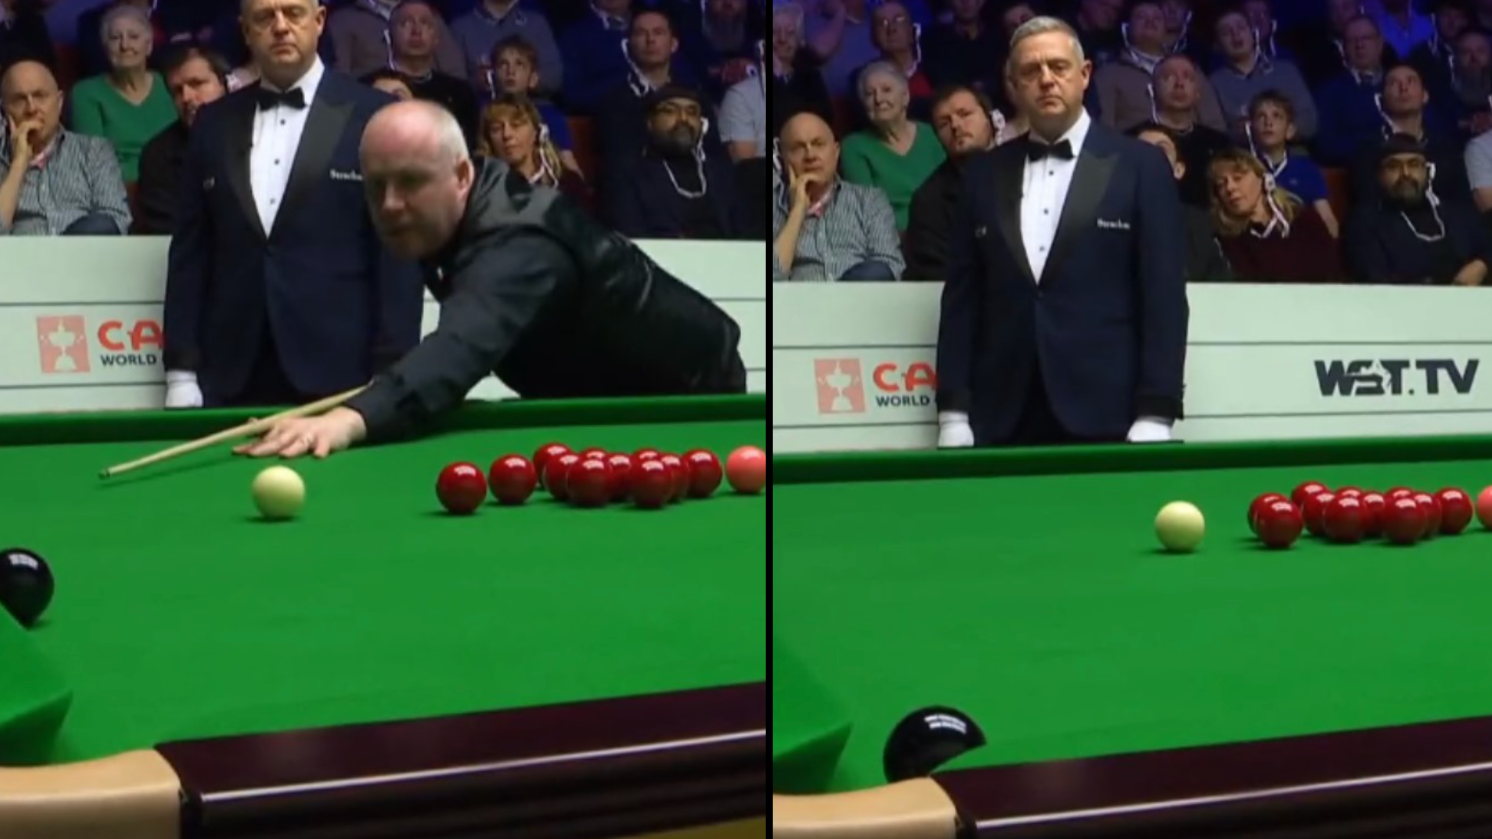 Commentator calls out ridiculous problem with table at World Snooker Championships